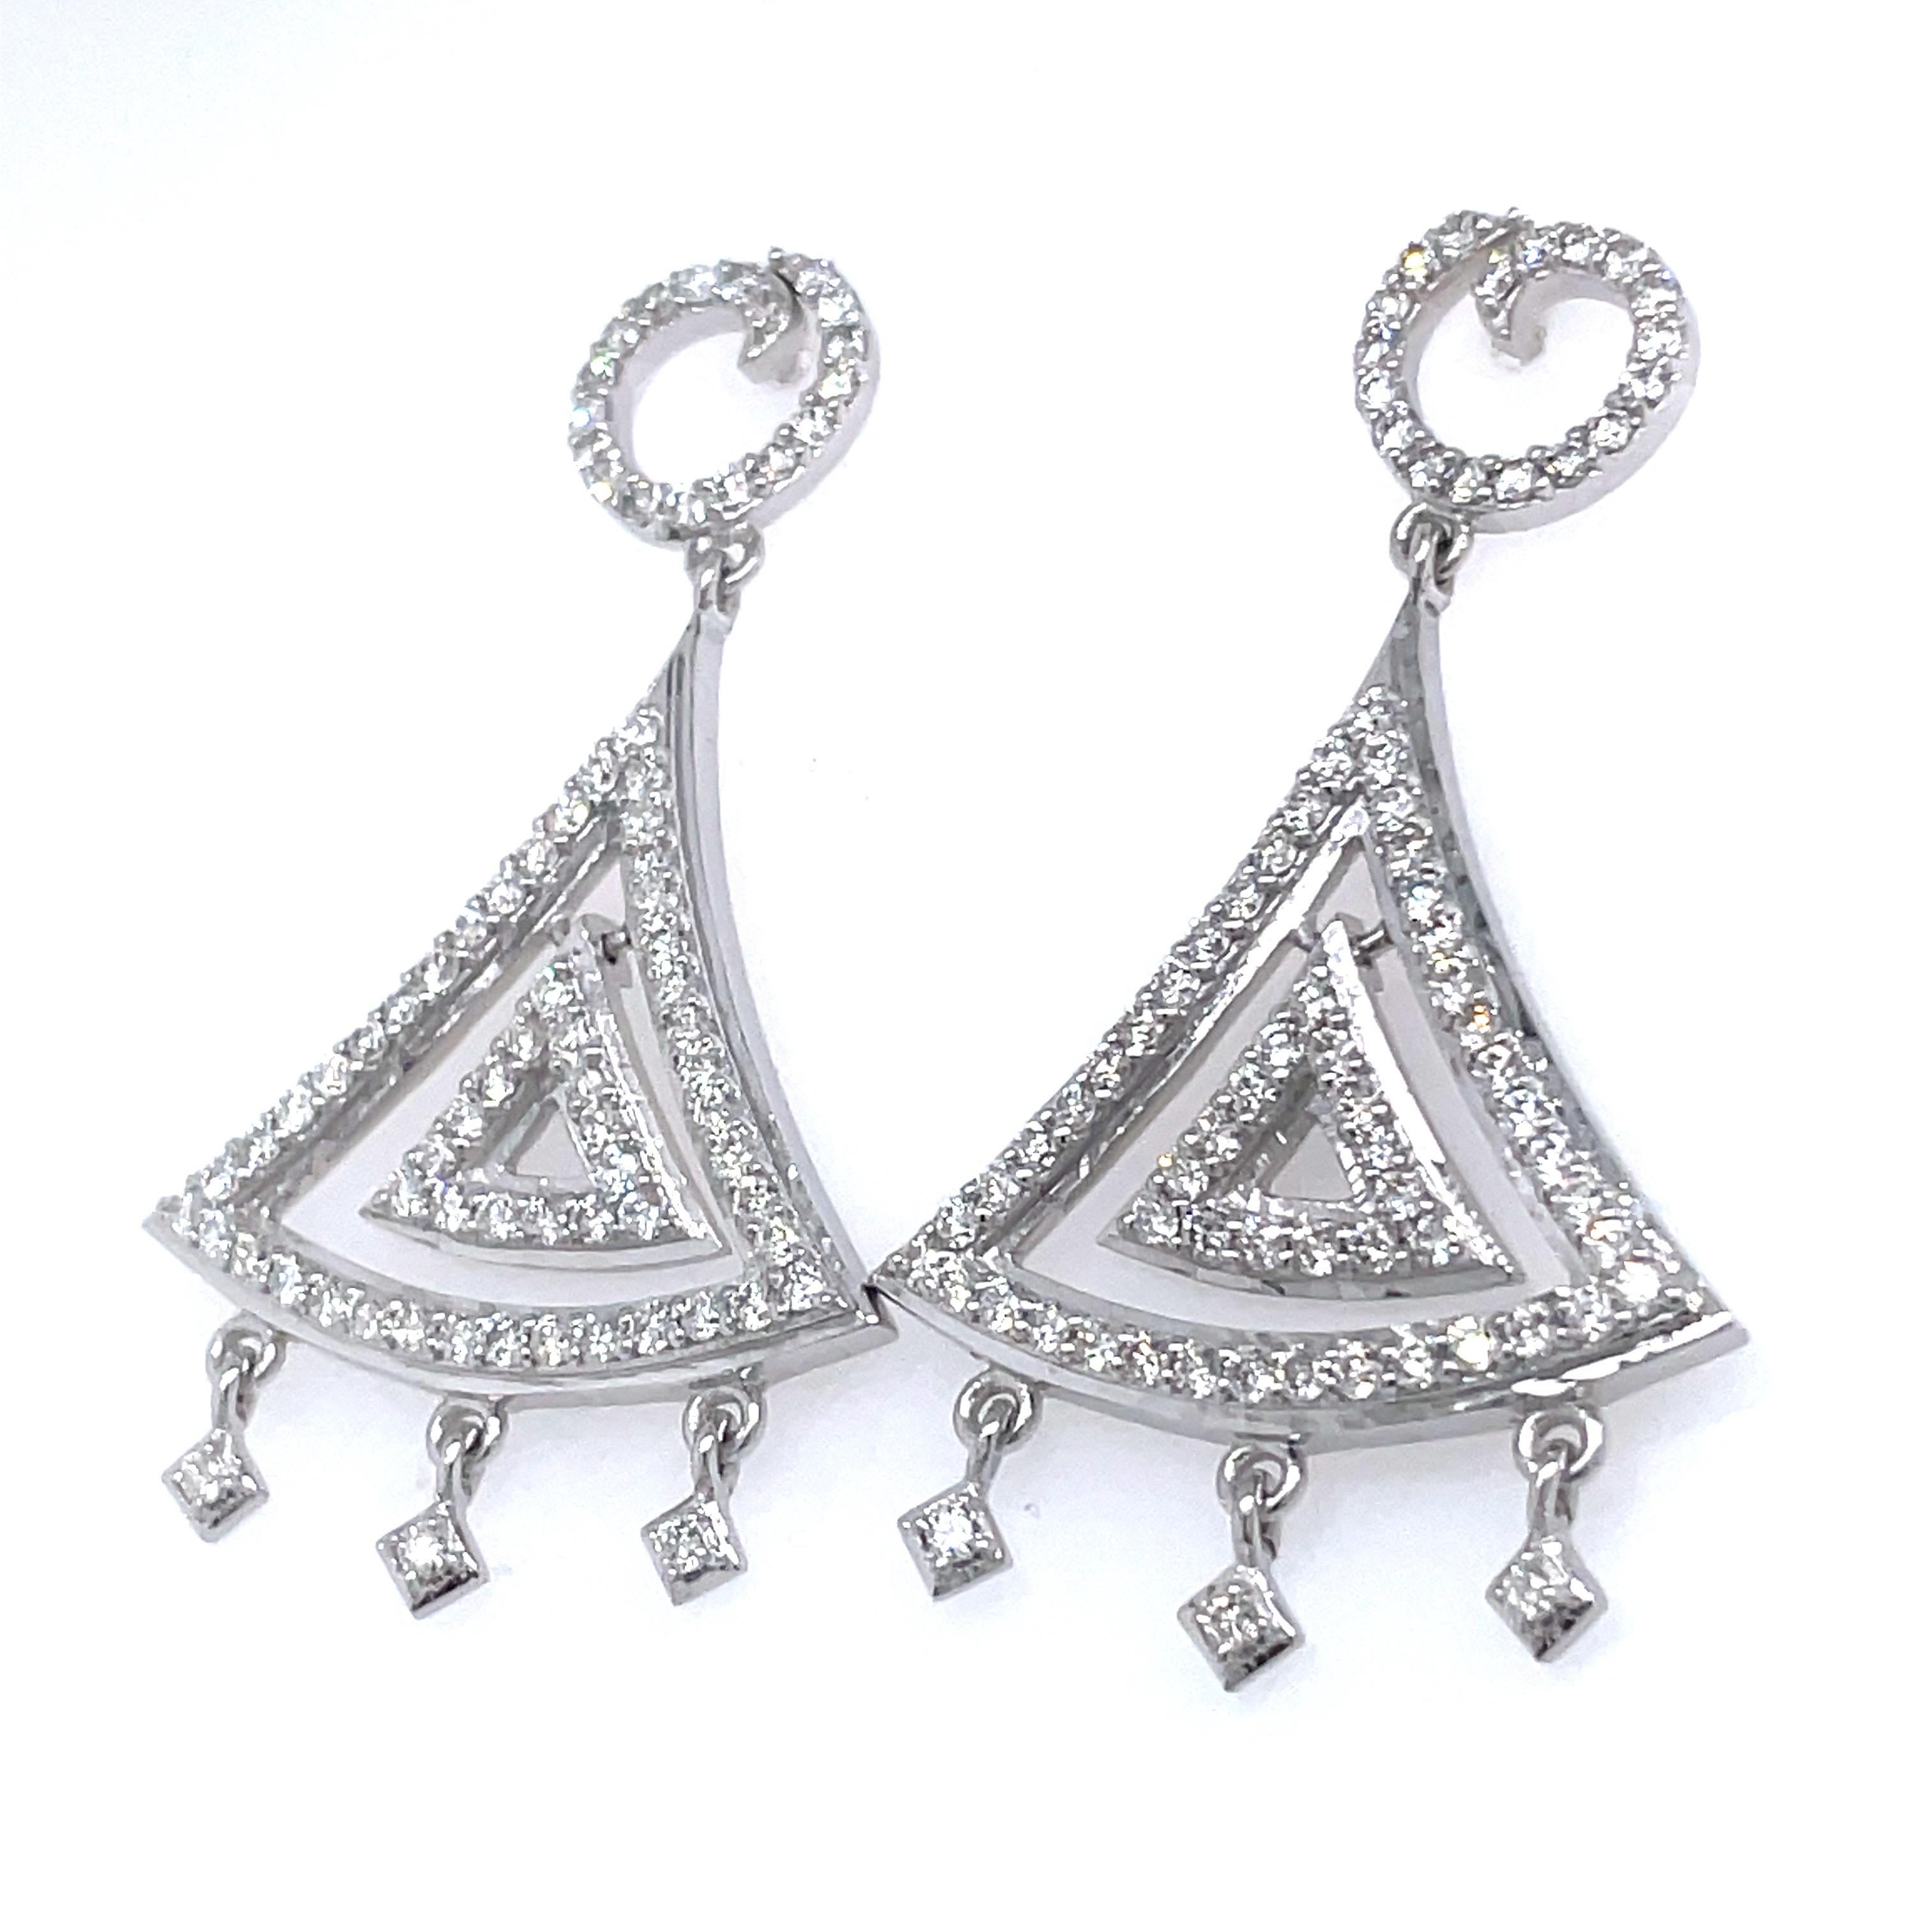 Contemporary 14k White Gold Triangle Shaped Chandelier Earrings For Sale